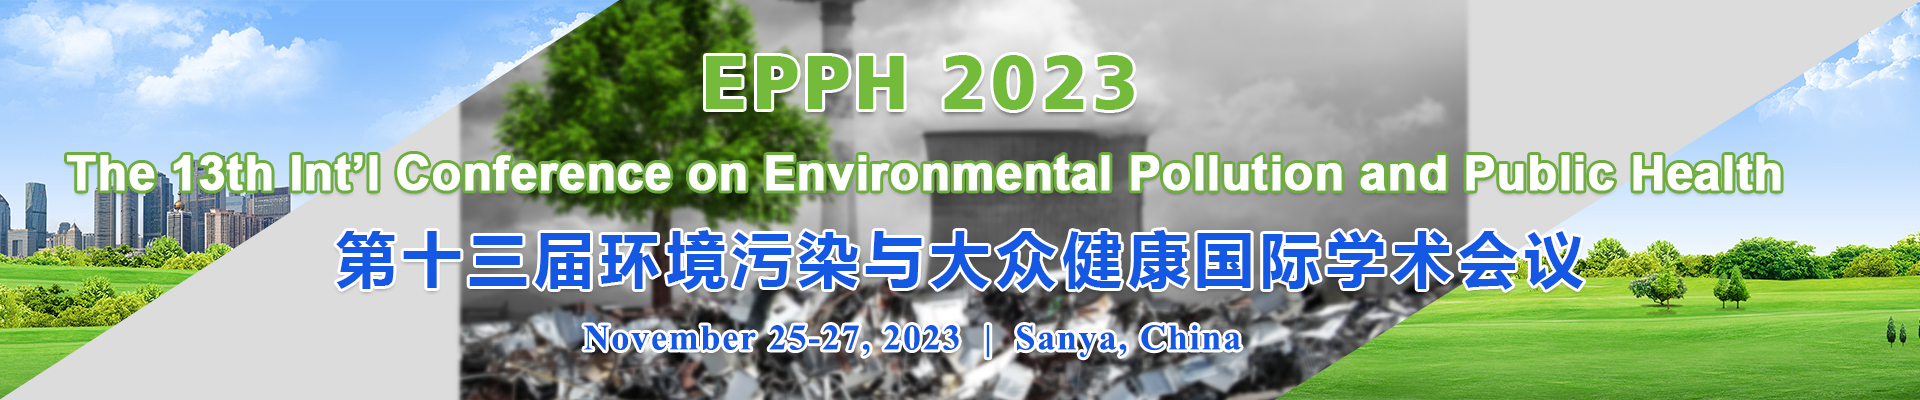 The 13th Int’l Conference on Environmental Pollution and Public Health (EPPH 2023) 